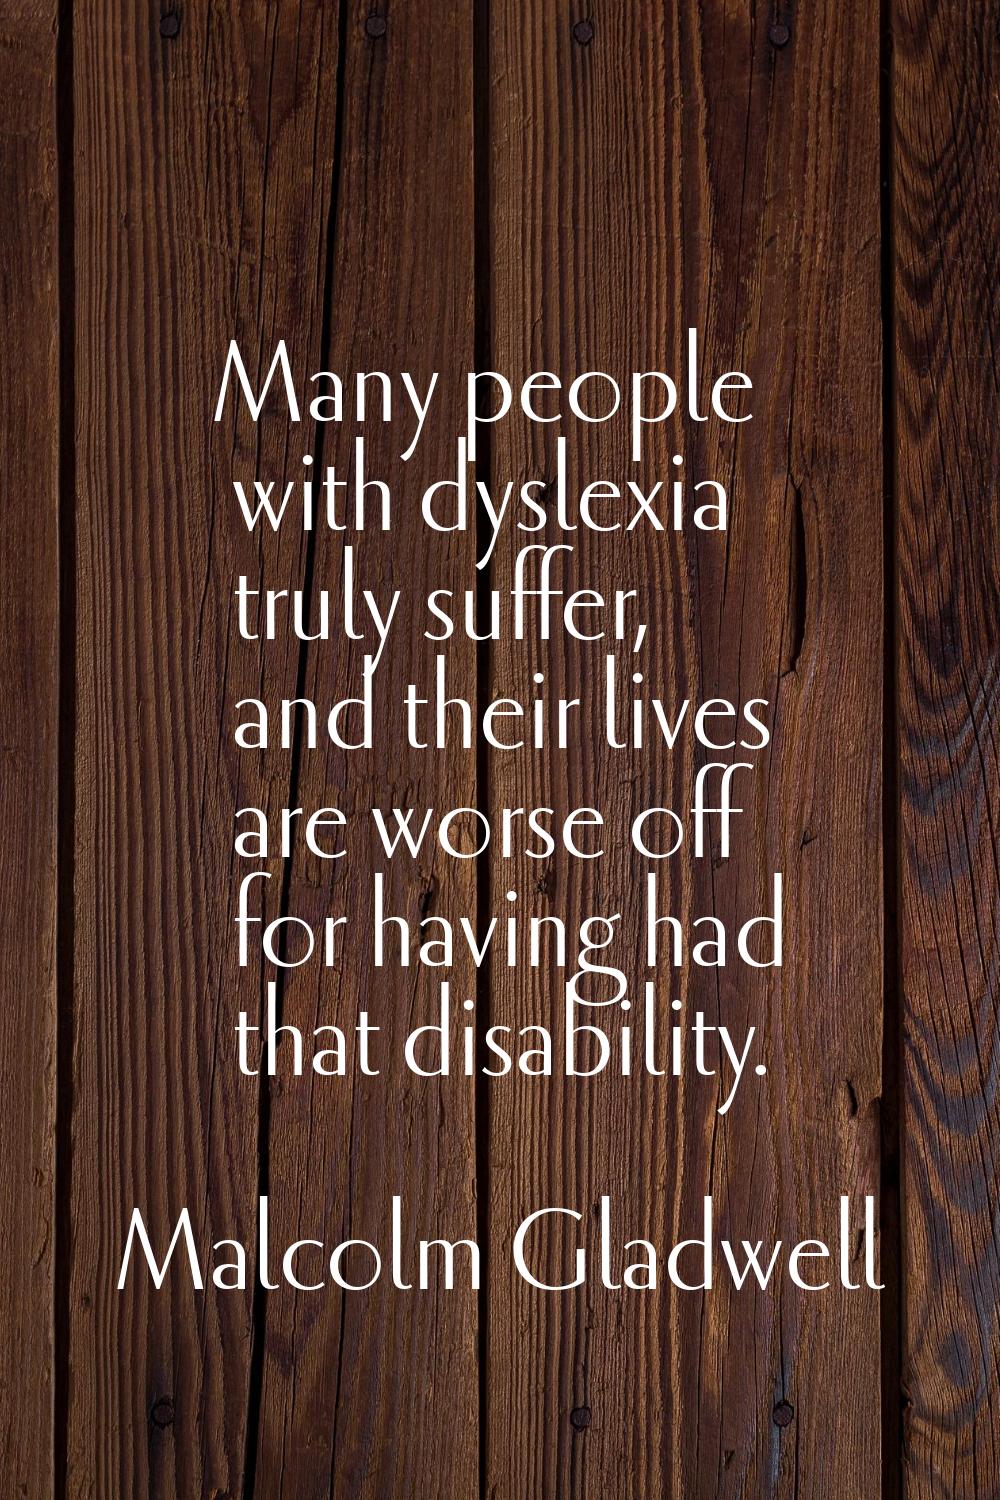 Many people with dyslexia truly suffer, and their lives are worse off for having had that disabilit